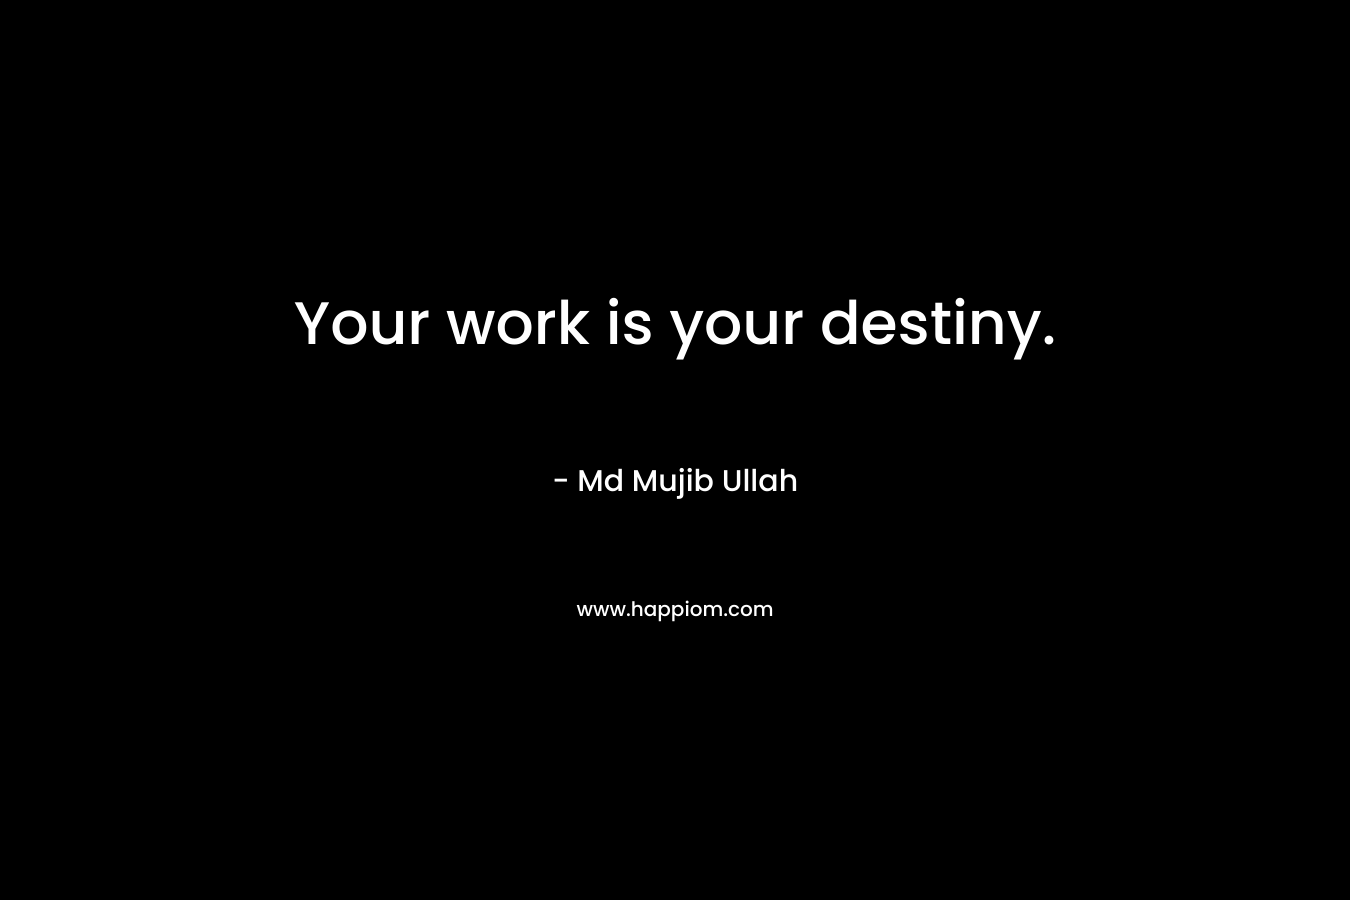 Your work is your destiny. – Md Mujib Ullah